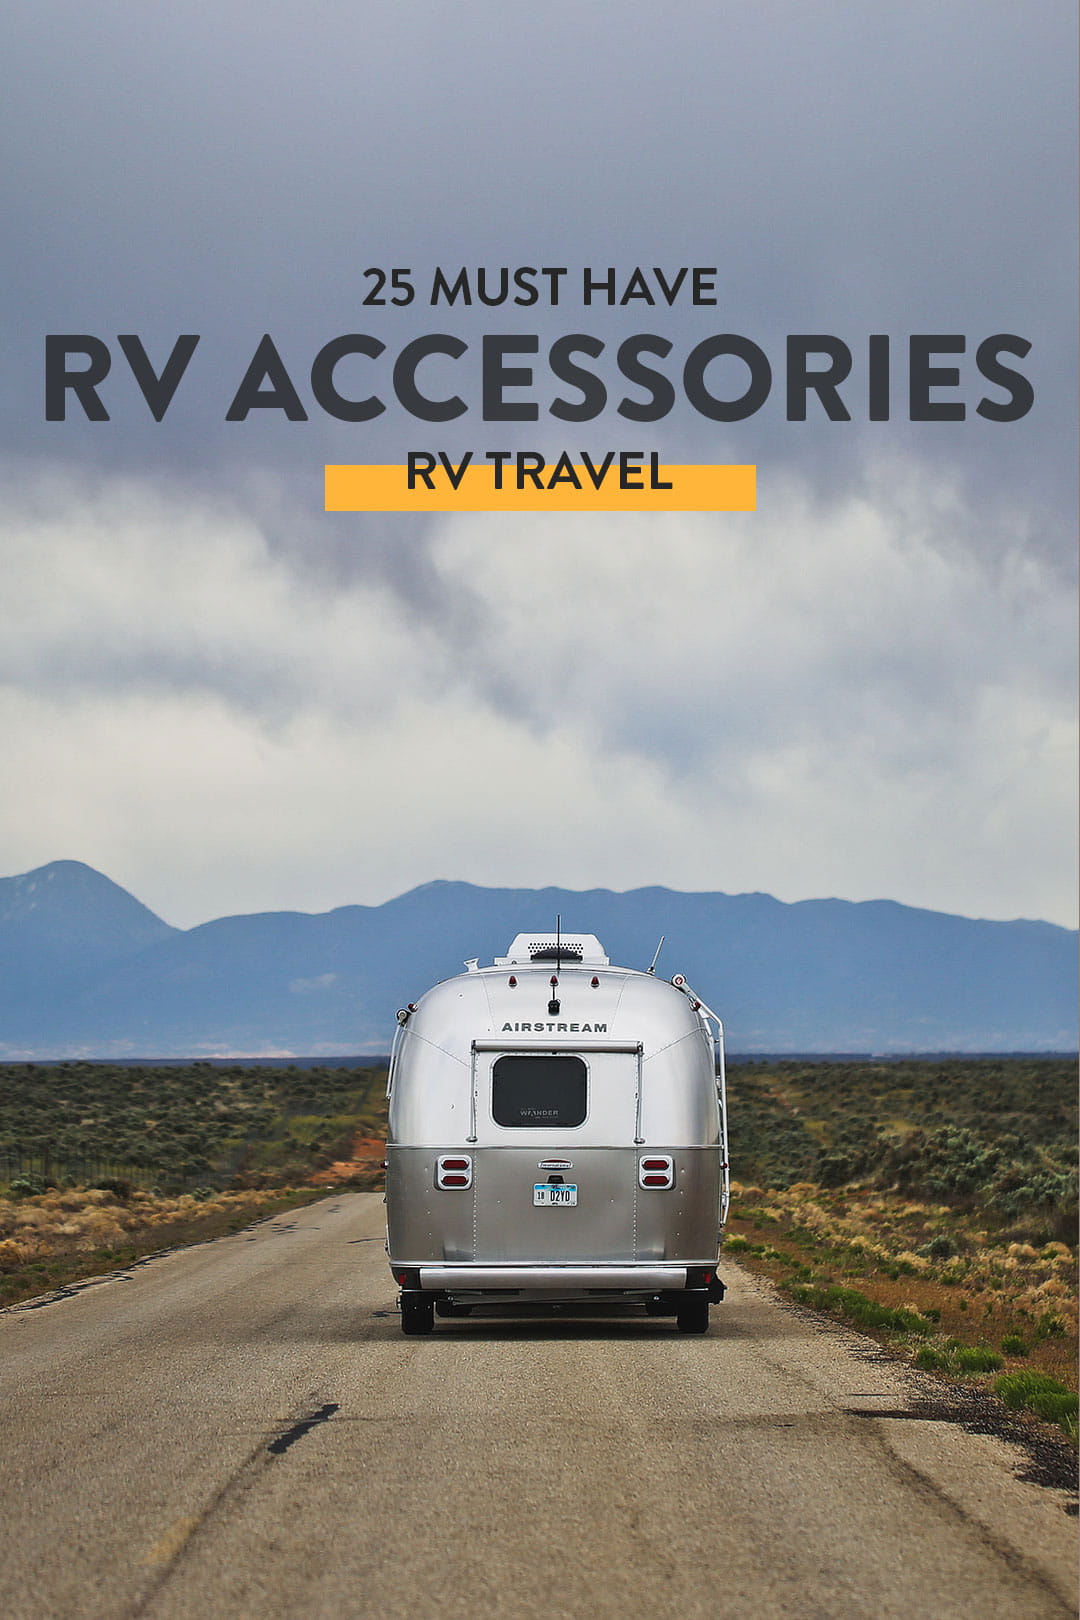 25 Must Have RV Accessories